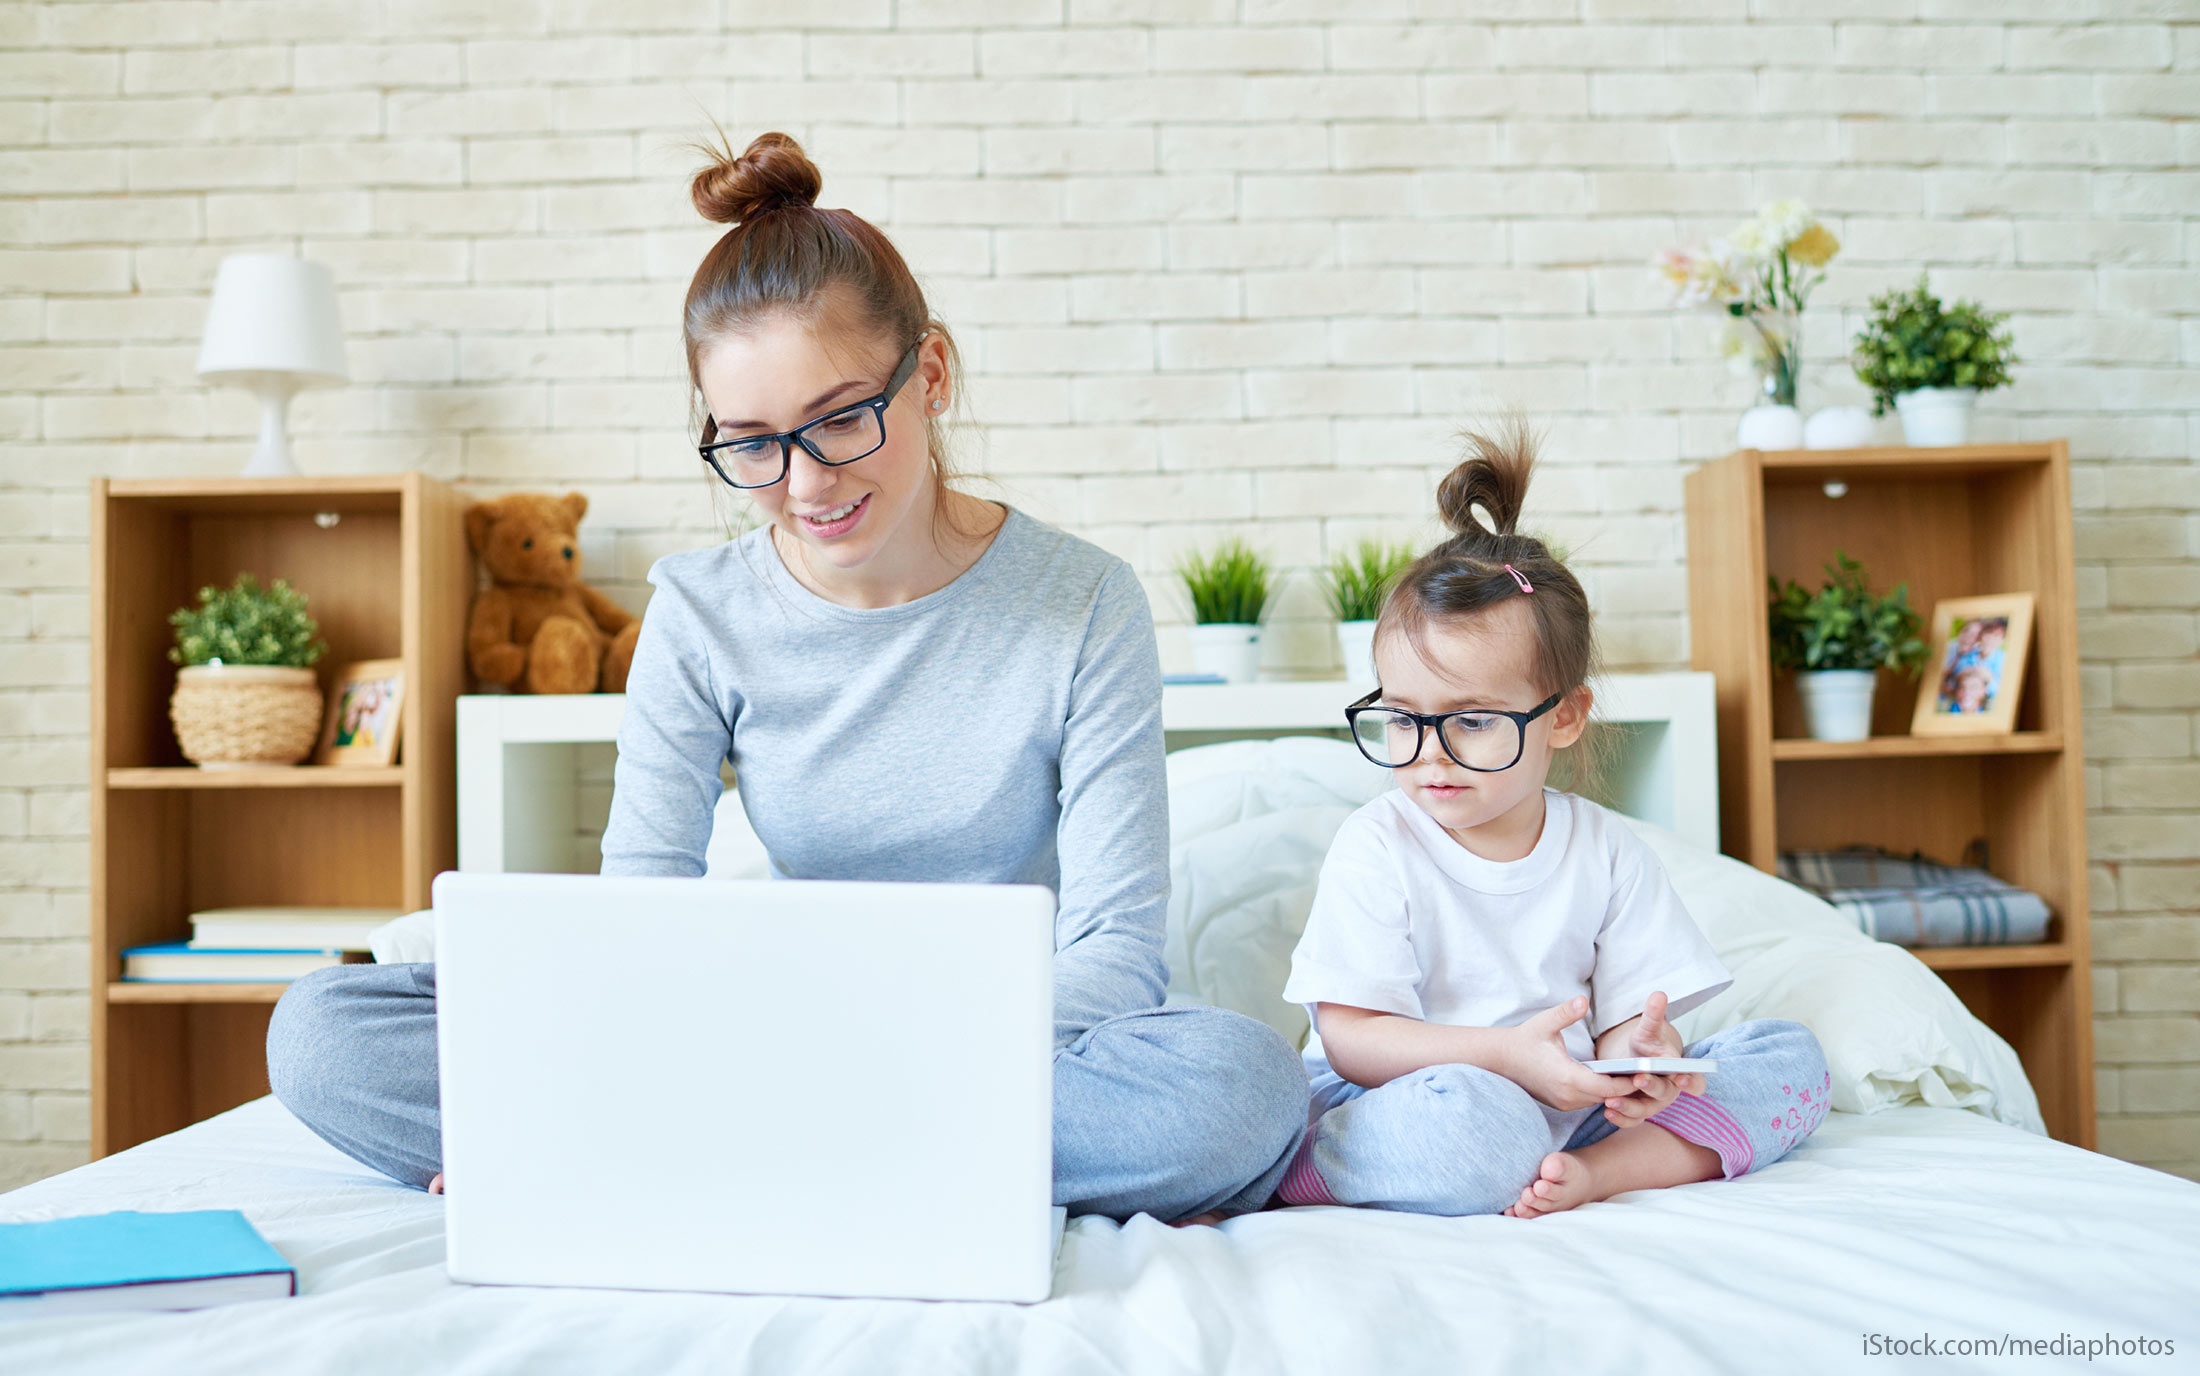 10-best-and-worst-side-jobs-for-stay-at-home-parents-gobanking